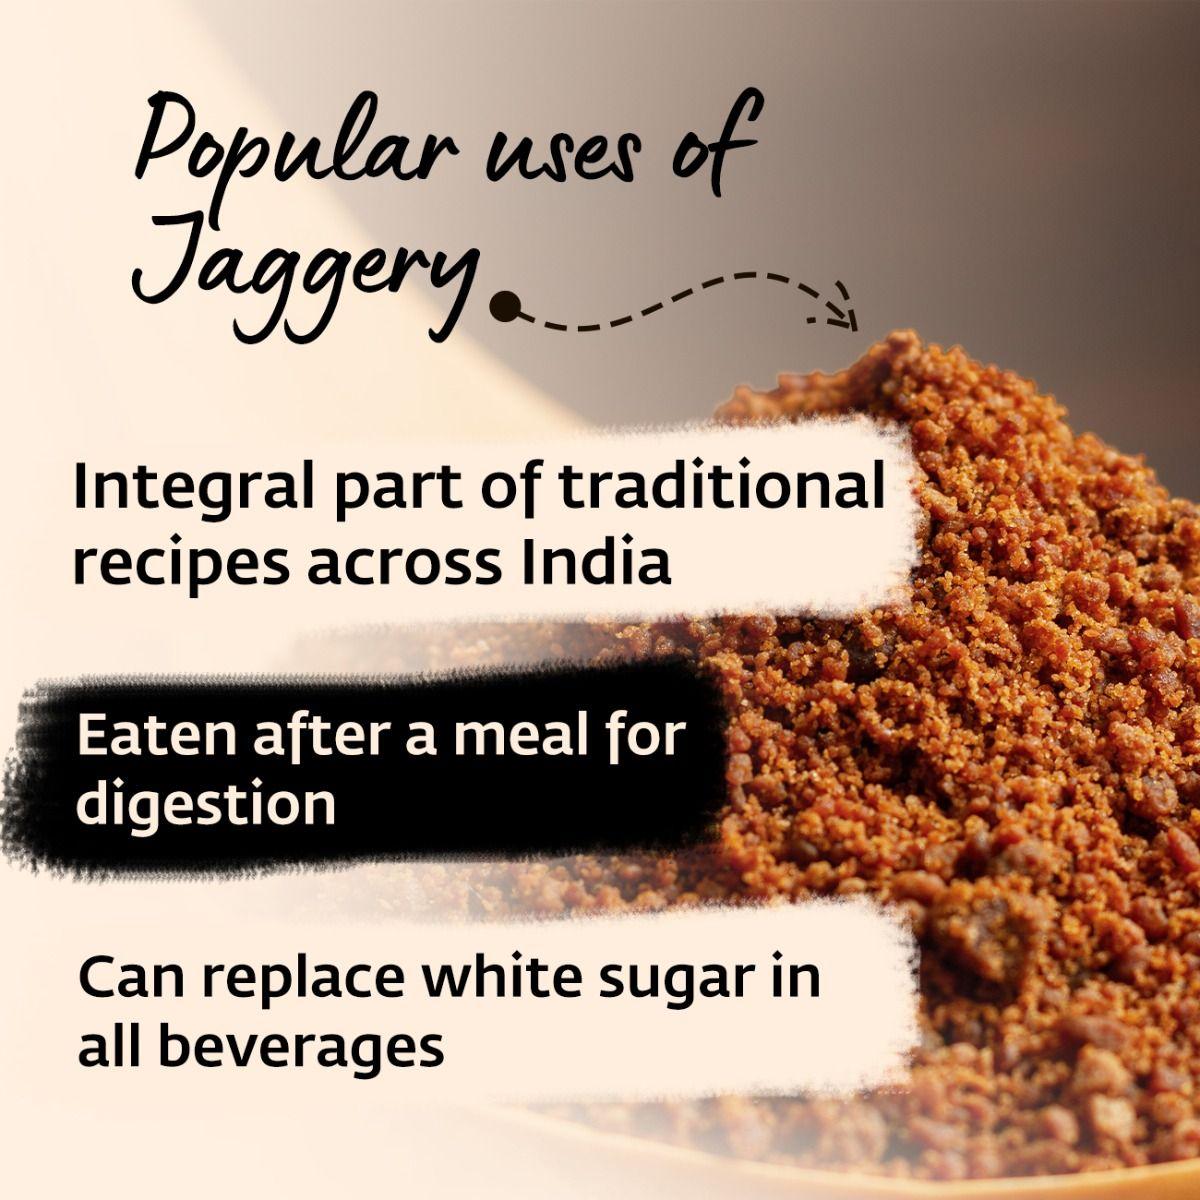 Picture of Isha Life Pure and natural Jaggery. Great alternative to white sugar. Chemical free. High in nutrition (500gm)